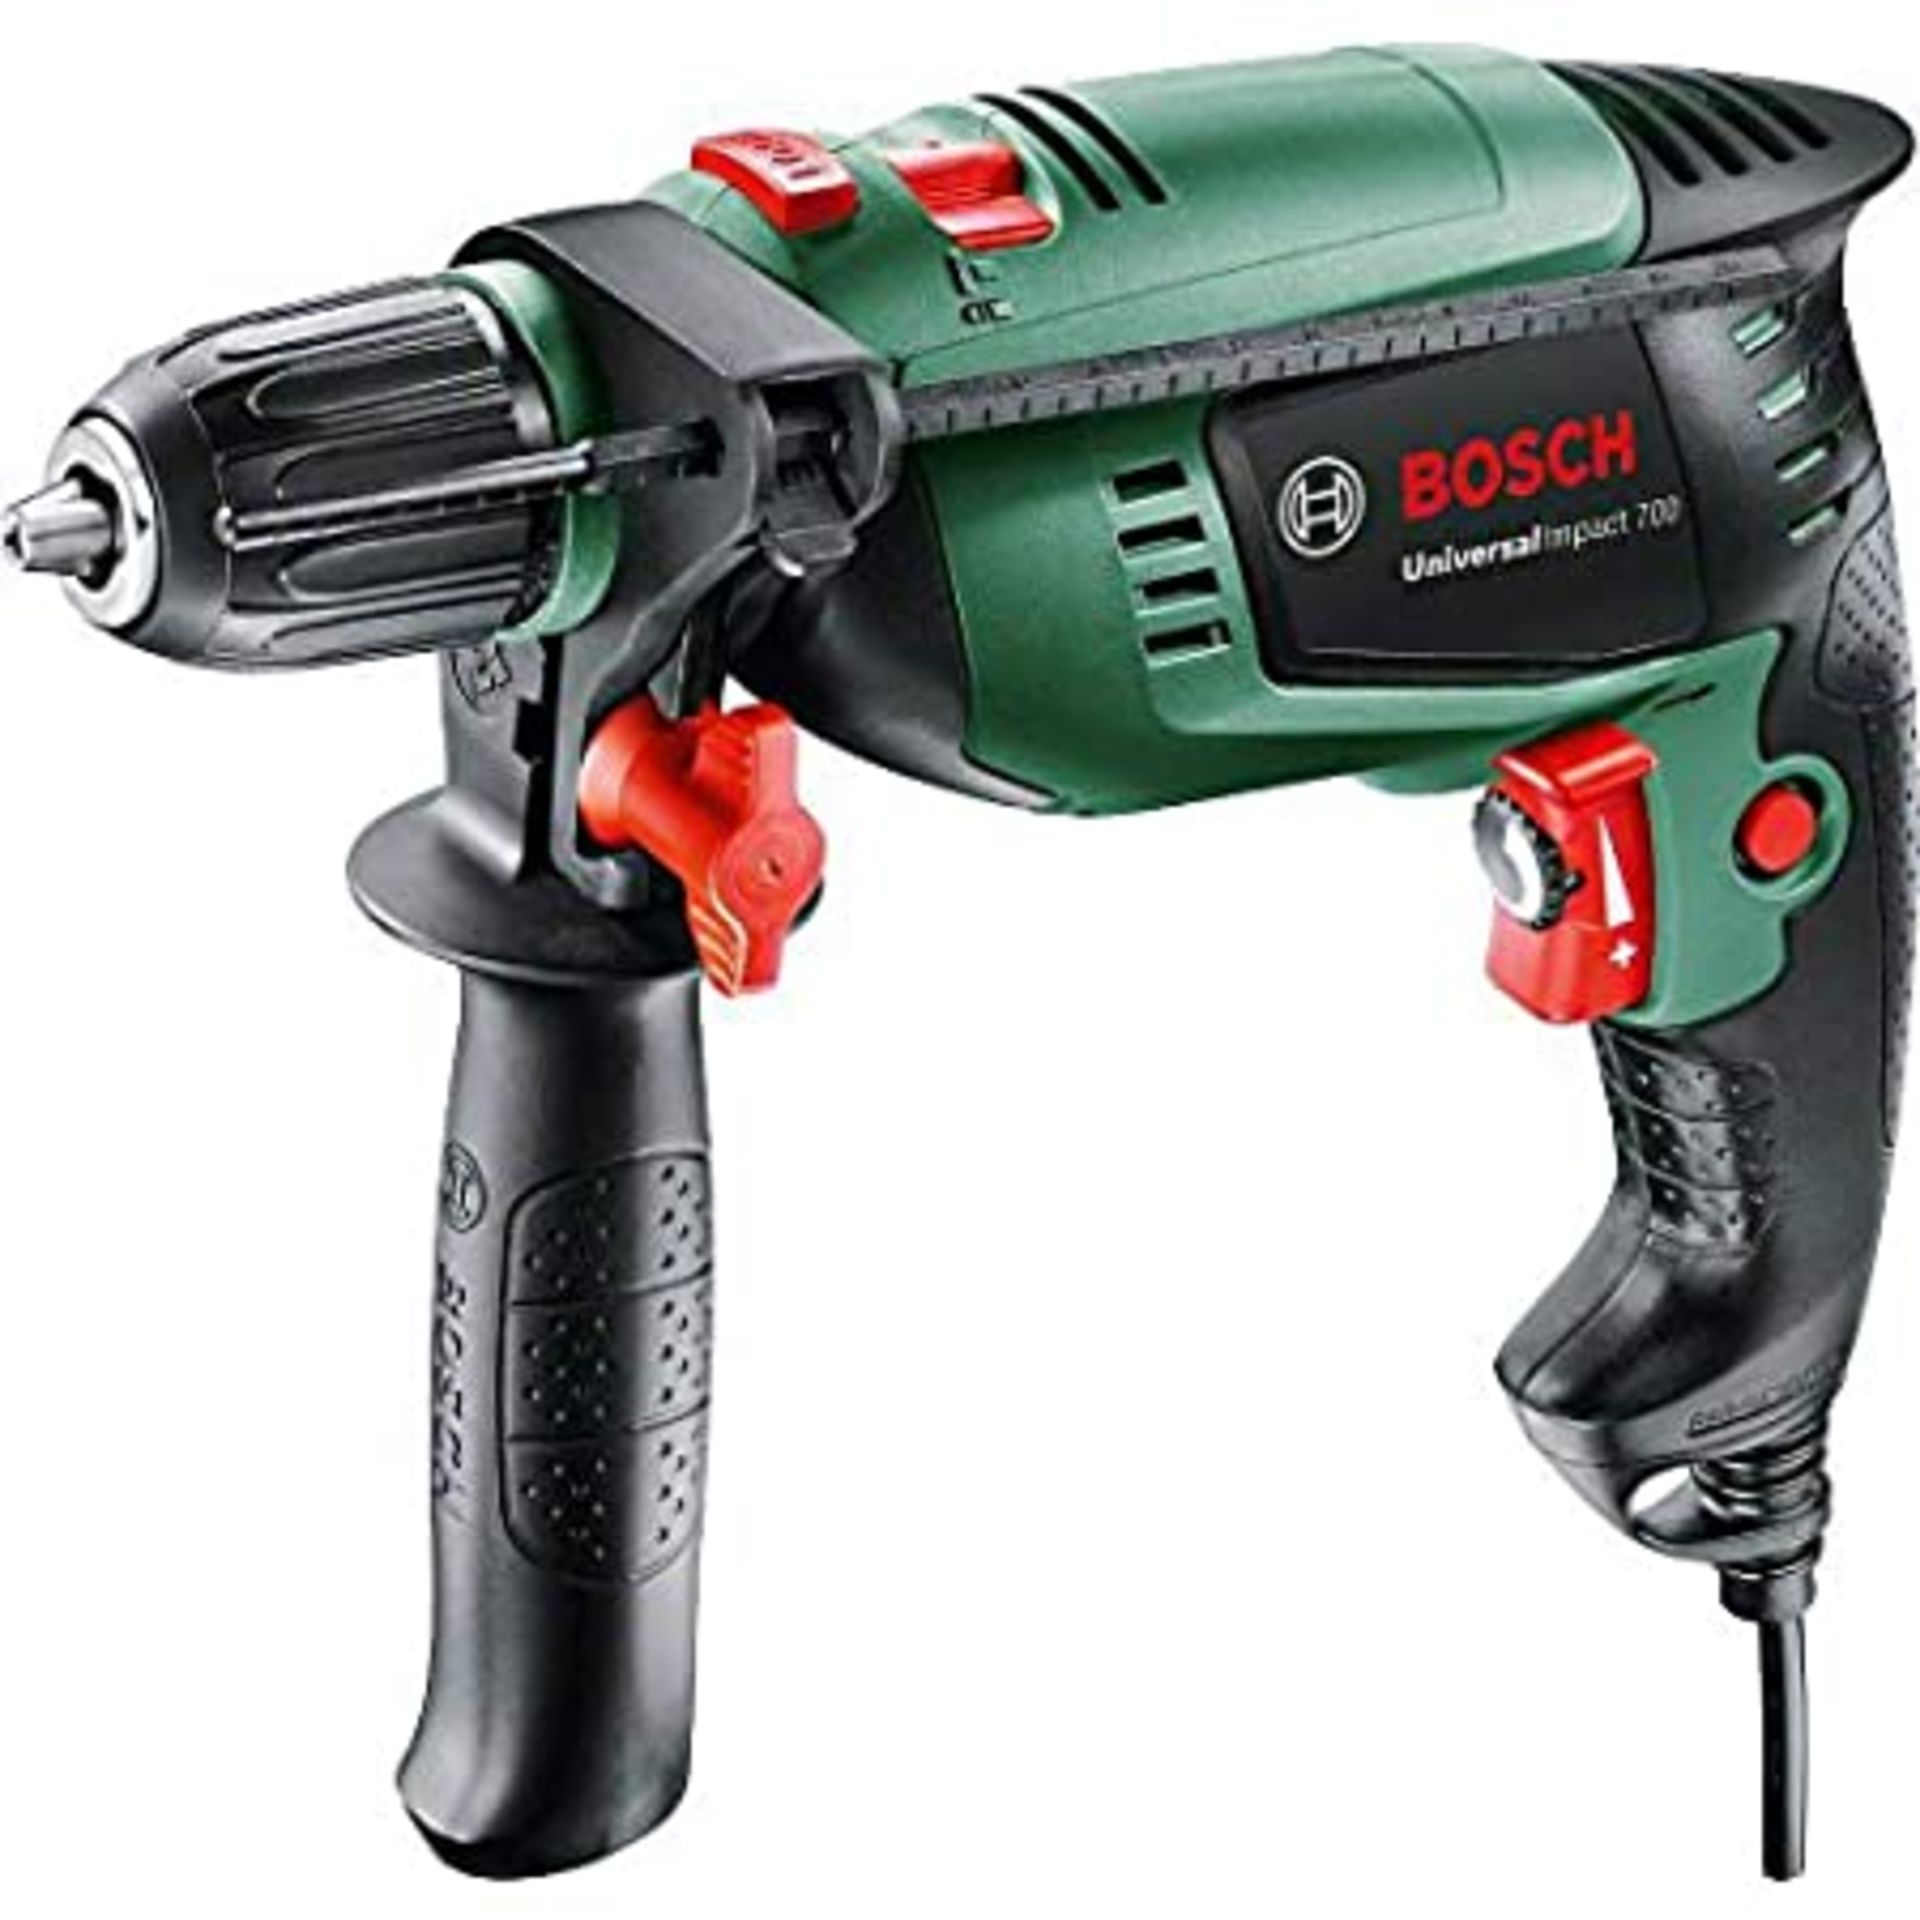 7x Power Tool Items. 1x Bosch Universal Impact 700 Drill With Case. 1x Bosch Jigsaw With Pendulem A